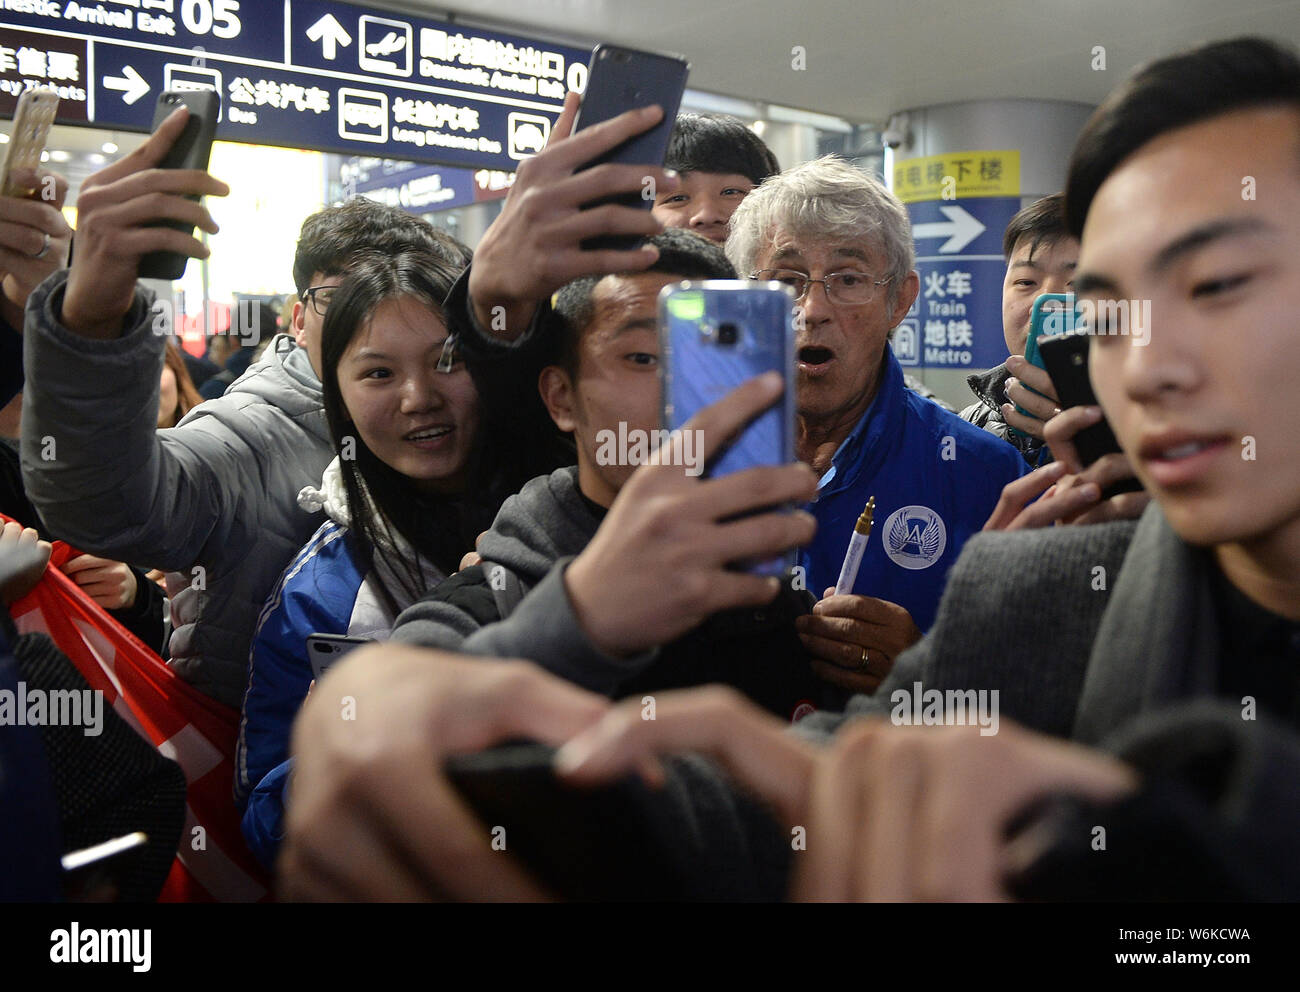 Serbian football coach and former player Bora Milutinovic, center, takes selfies with fans as he arrives at the Chengdu Shuangliu International Airpor Stock Photo